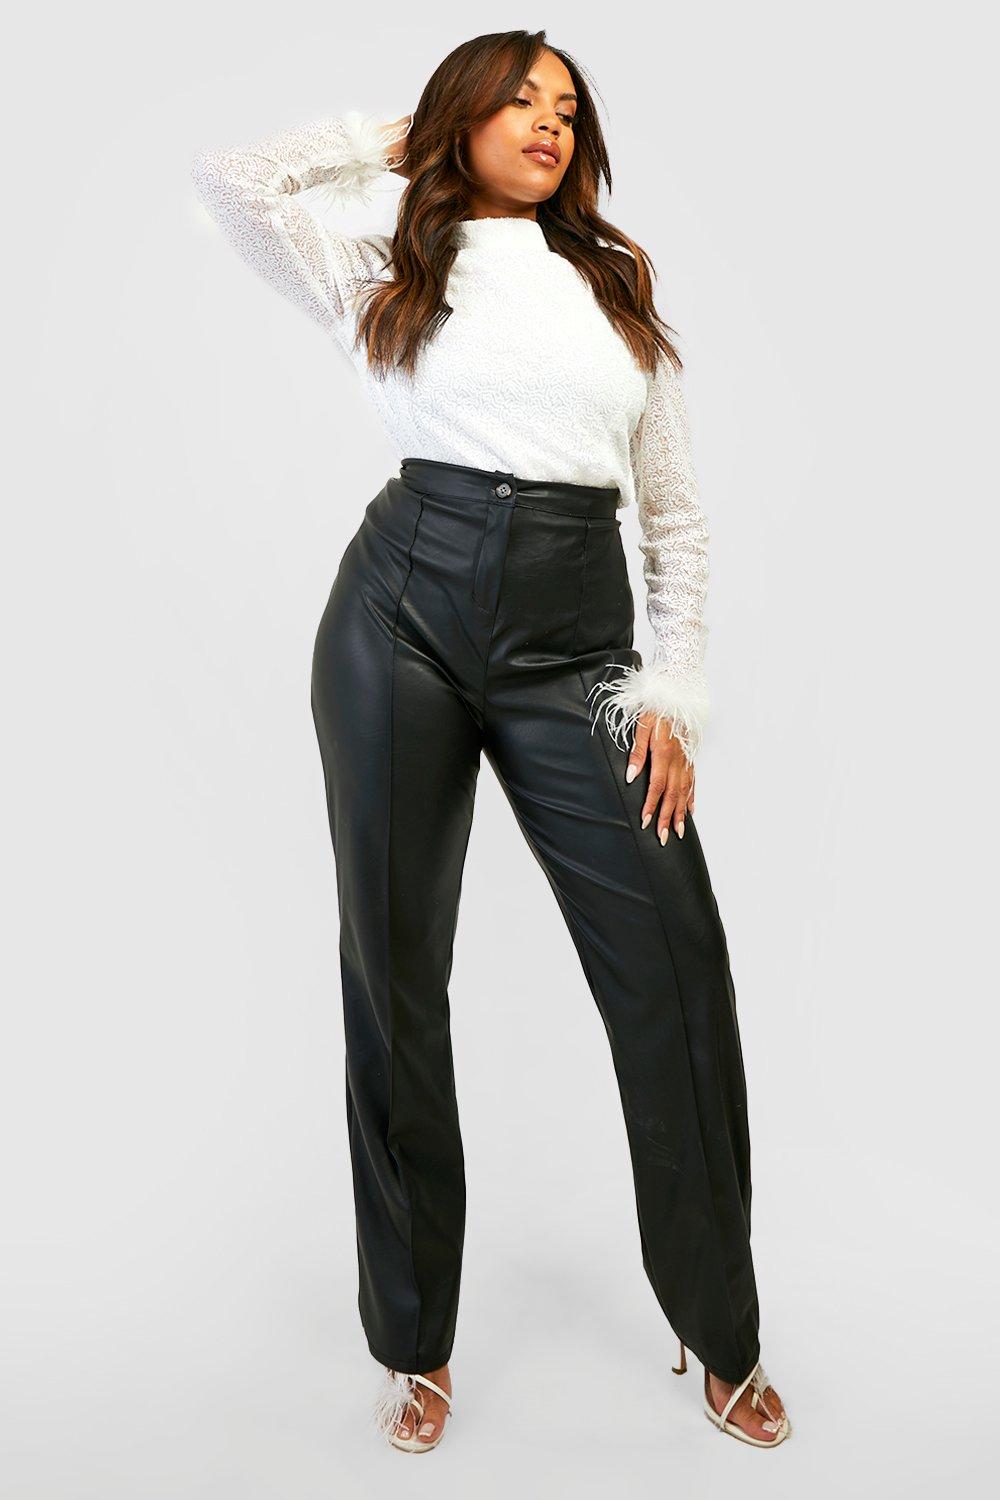 Missguided - Plus Size Faux Leather Trousers Black